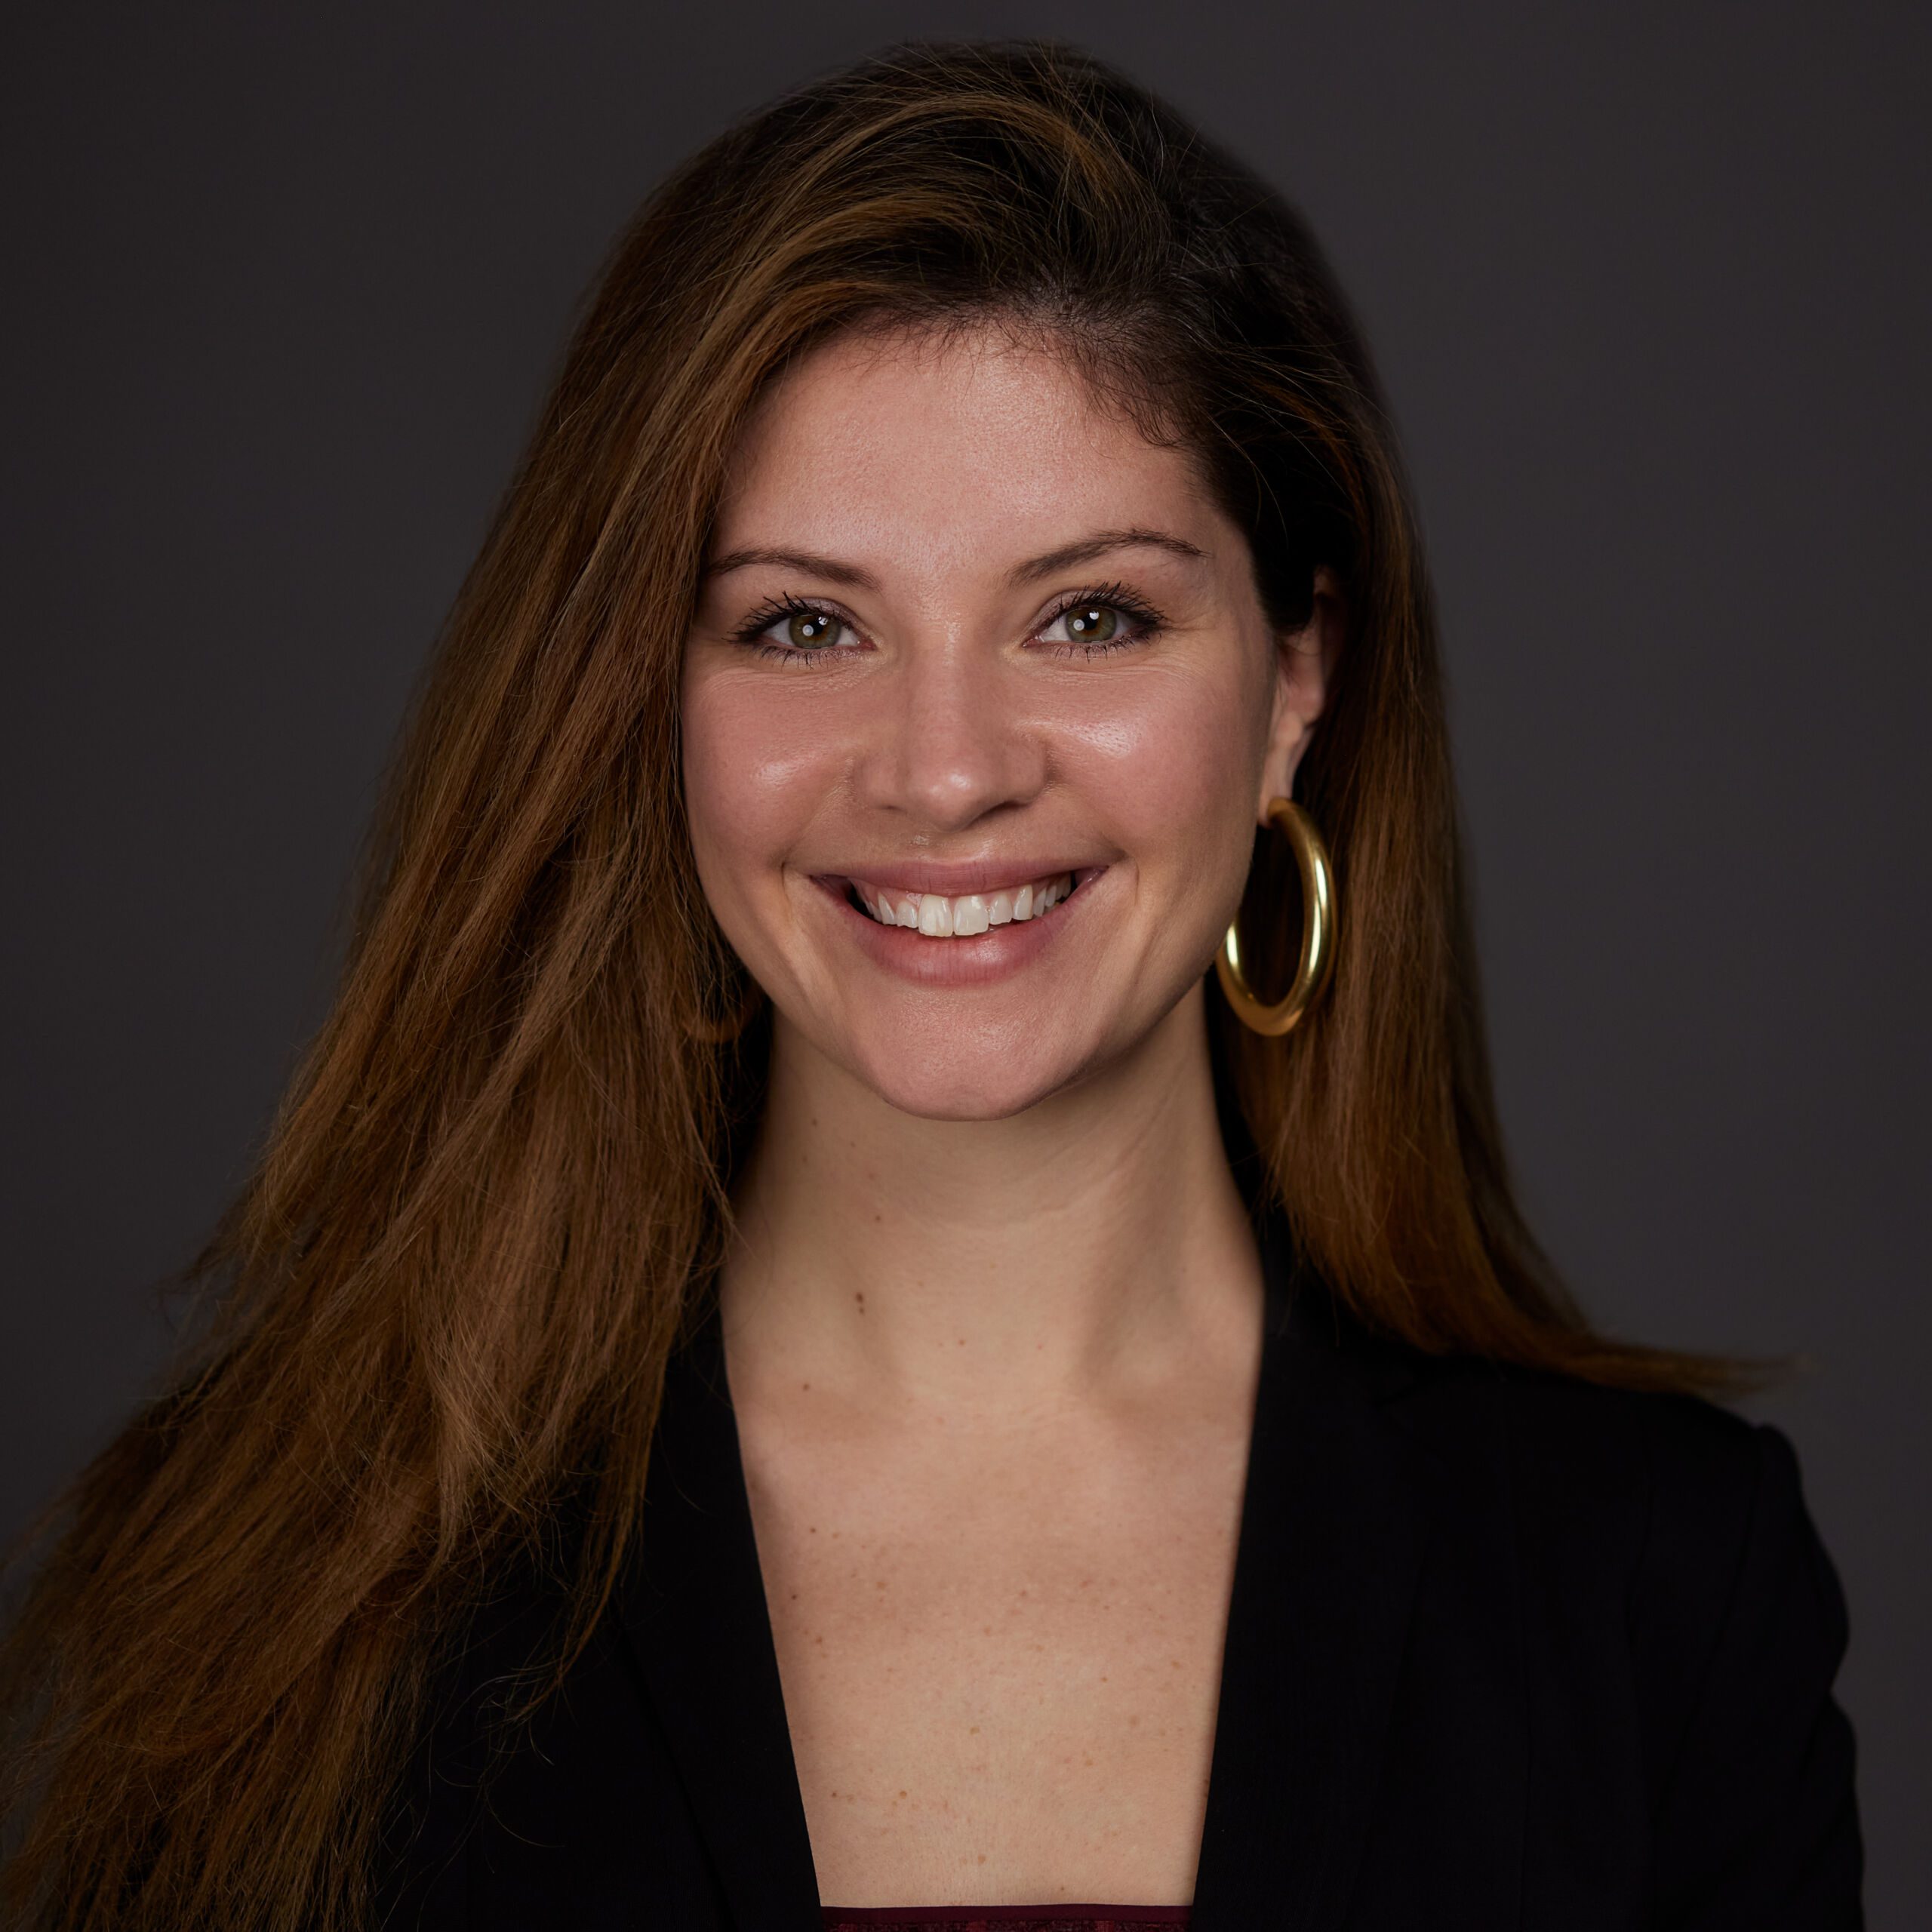 Photo shows a professional headshot of Jessie Weingartner, principal of Golder College Prep. She is a white woman with long straight brown hair. She is smiling and wearing a black long sleeve blouse and gold hoop earrings. The background is a solid gray color.